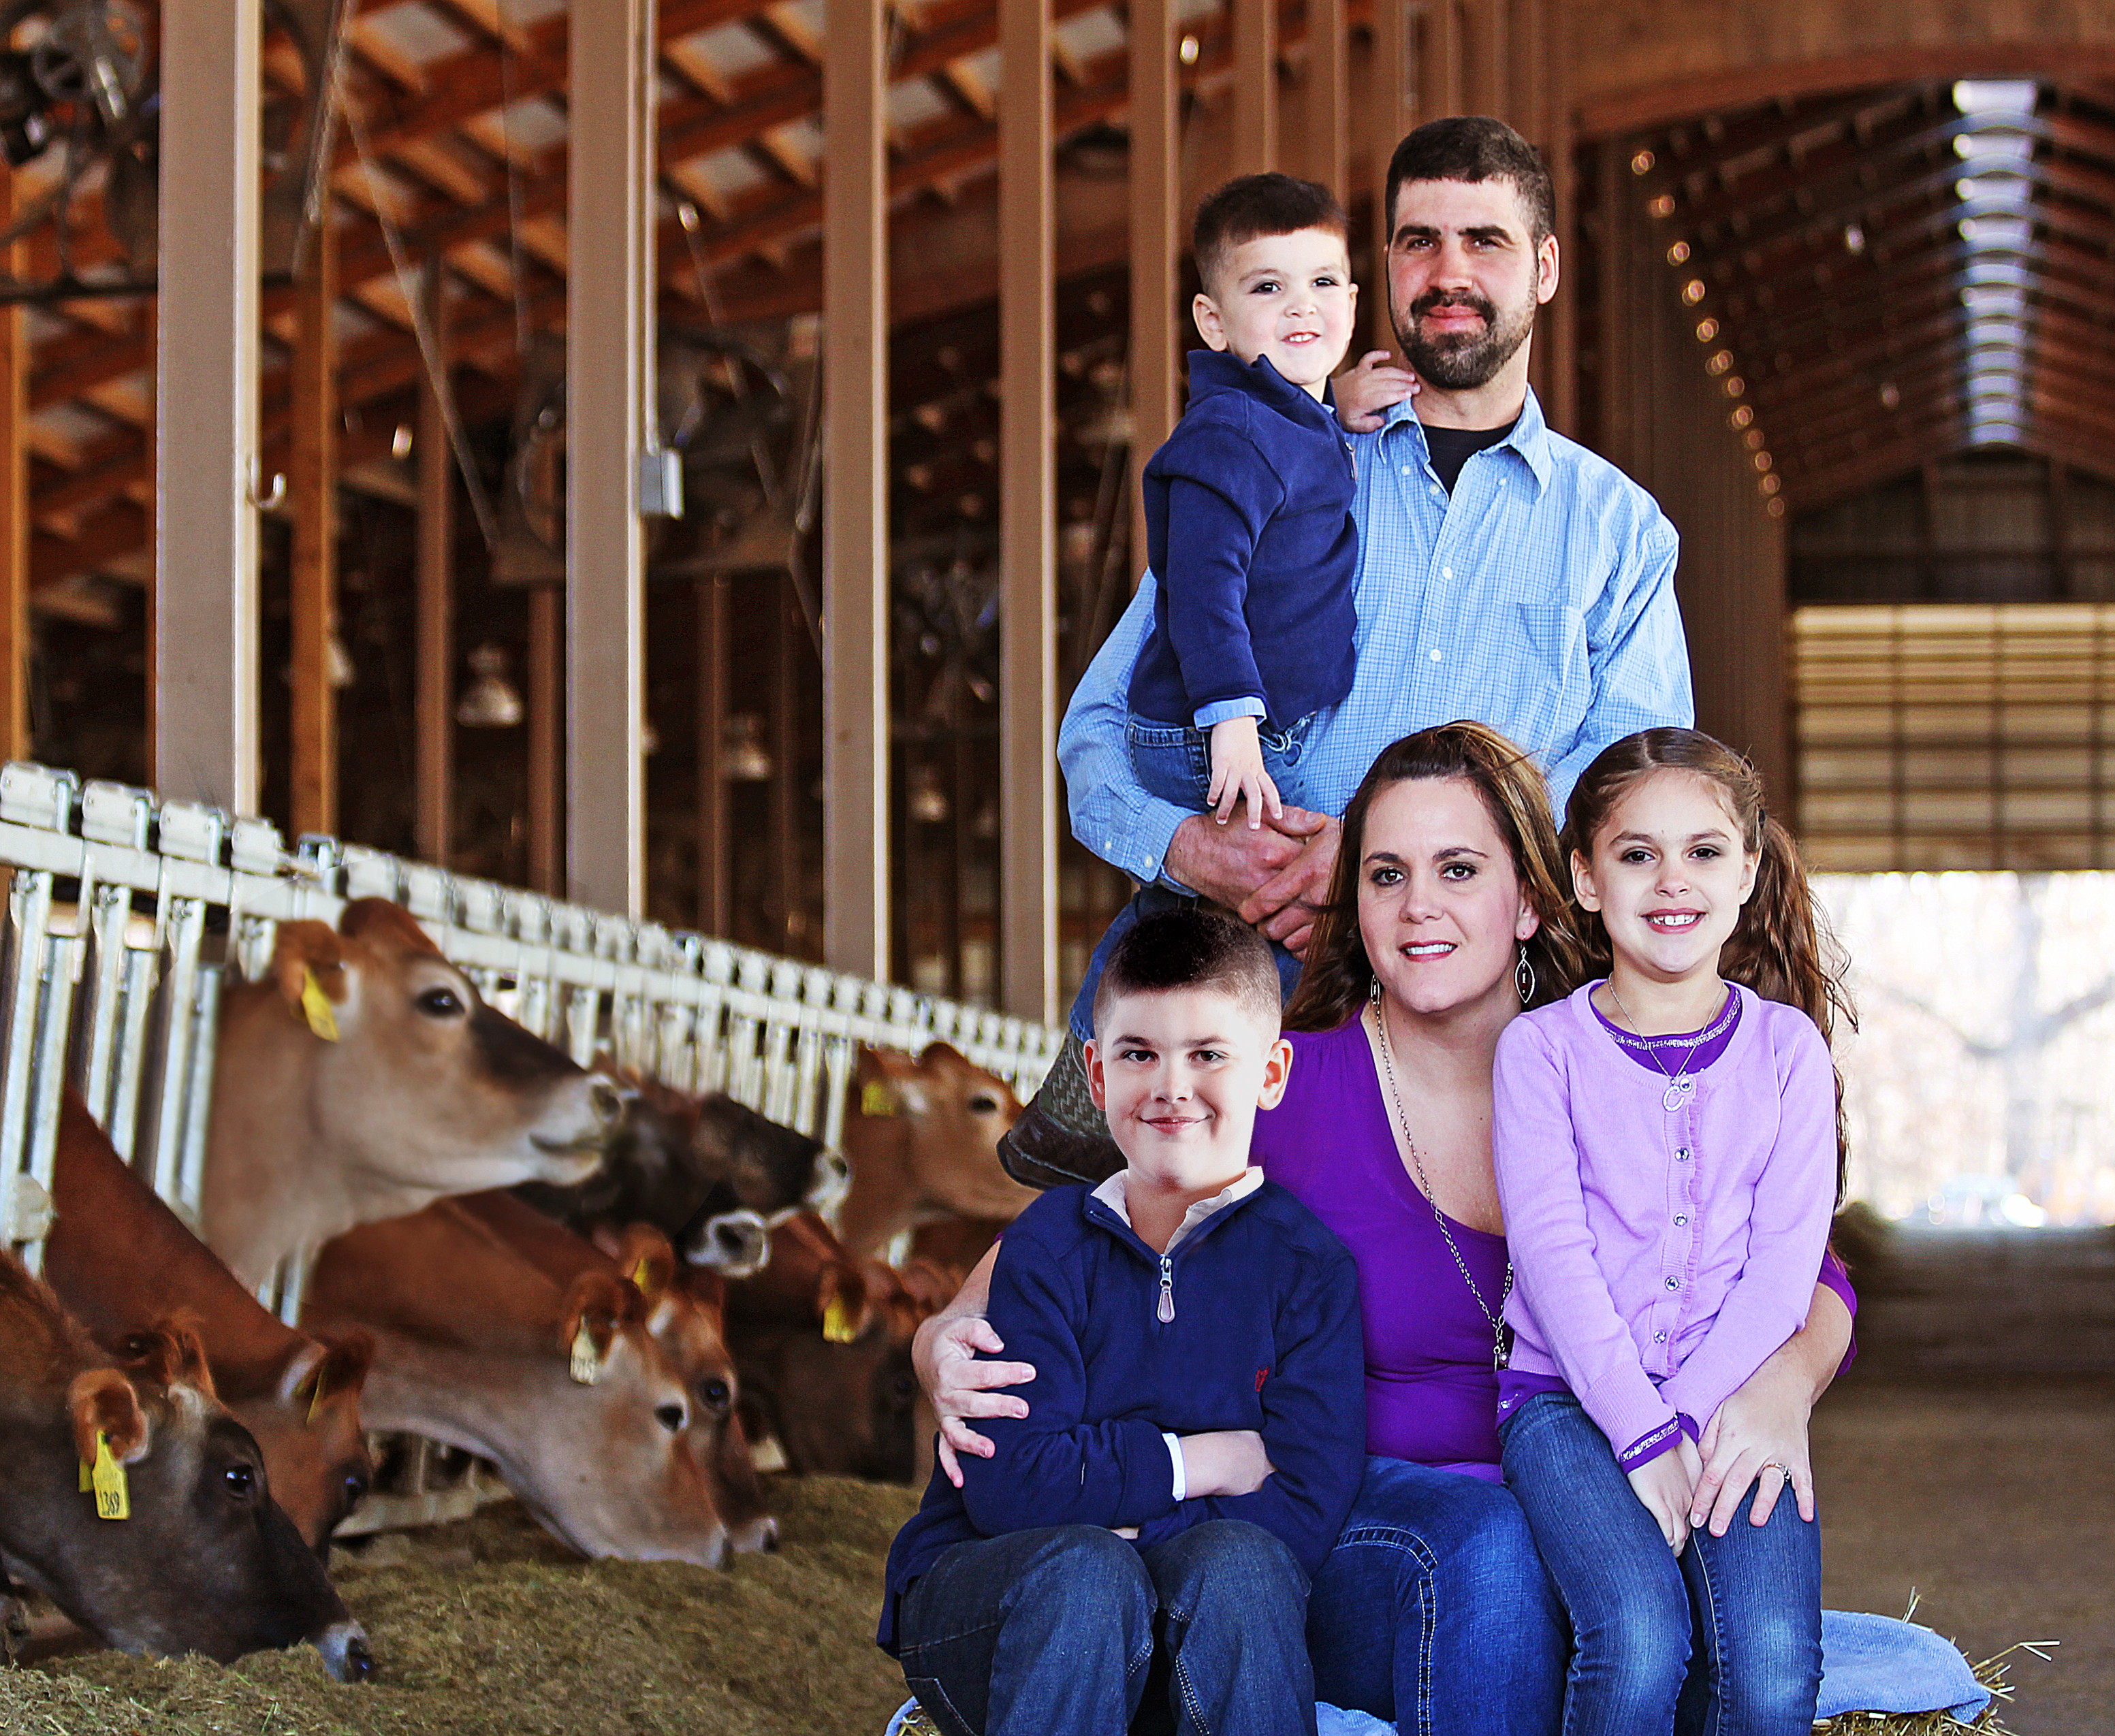 We are a family farm and proud of it! We take great pride in caring for our cattle and land that in return care for us! Karen Bohnert